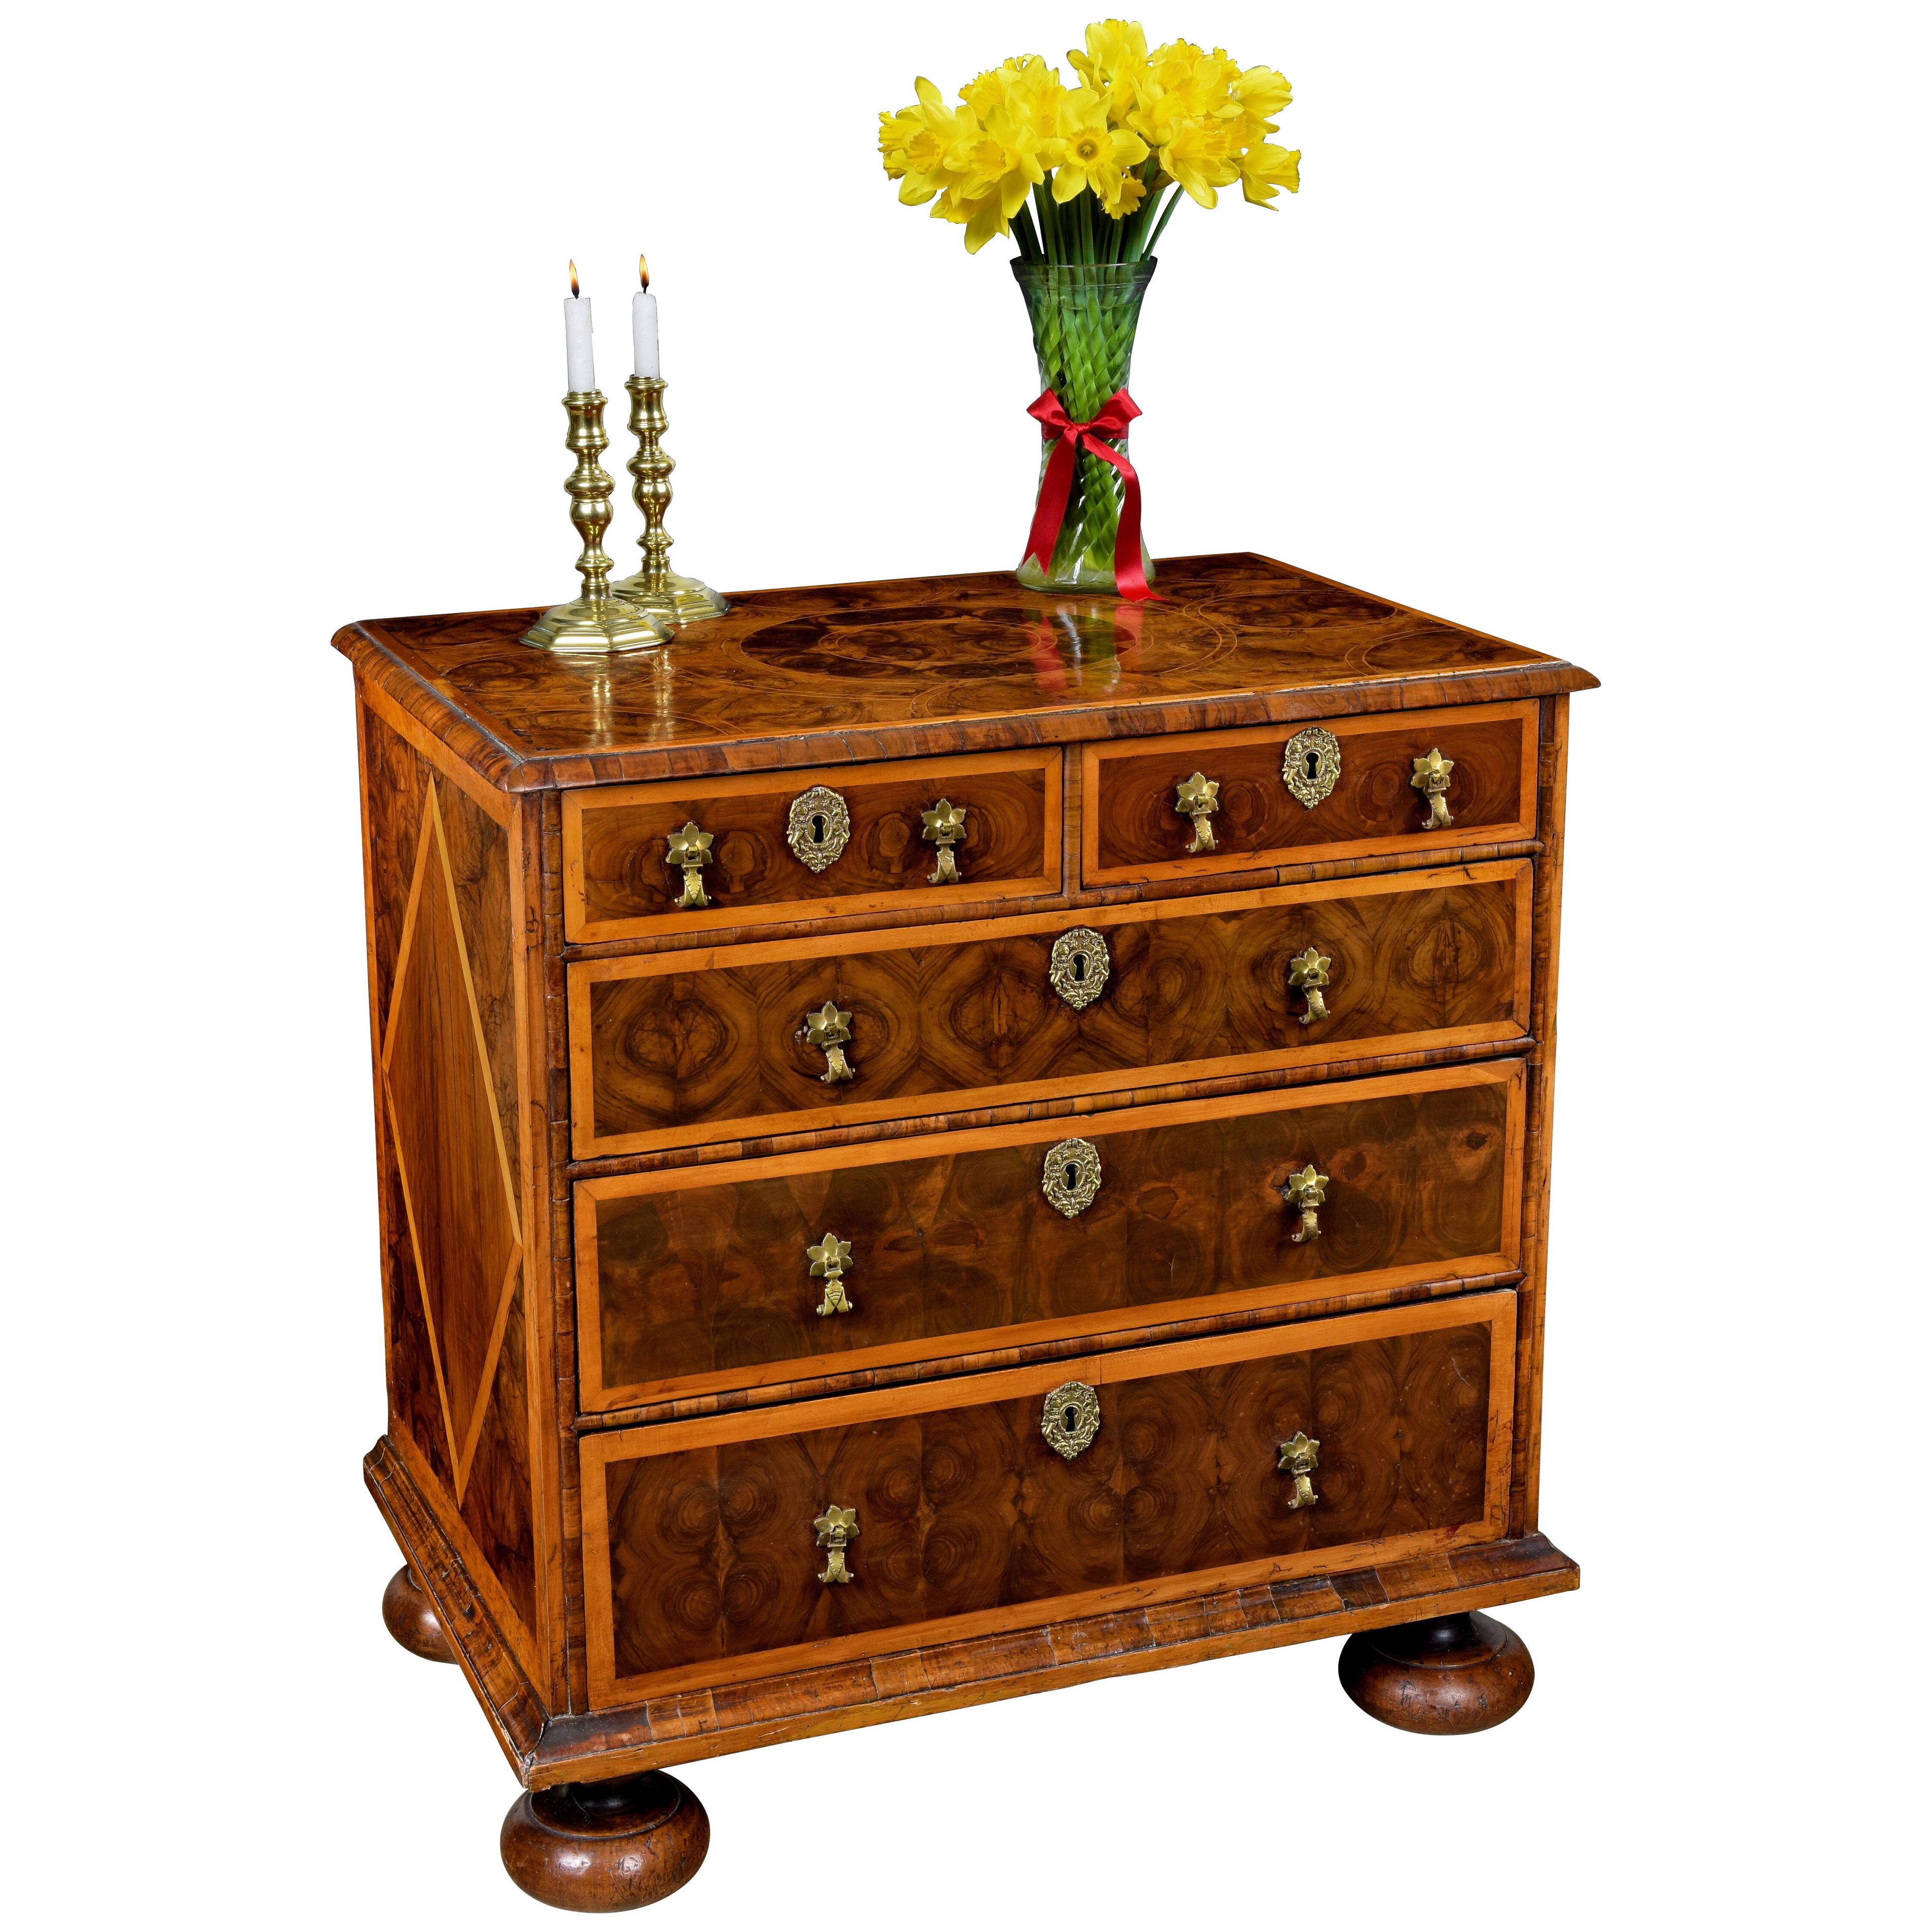 William and Mary Period Oyster Veneered Laburnum Chest of Drawers